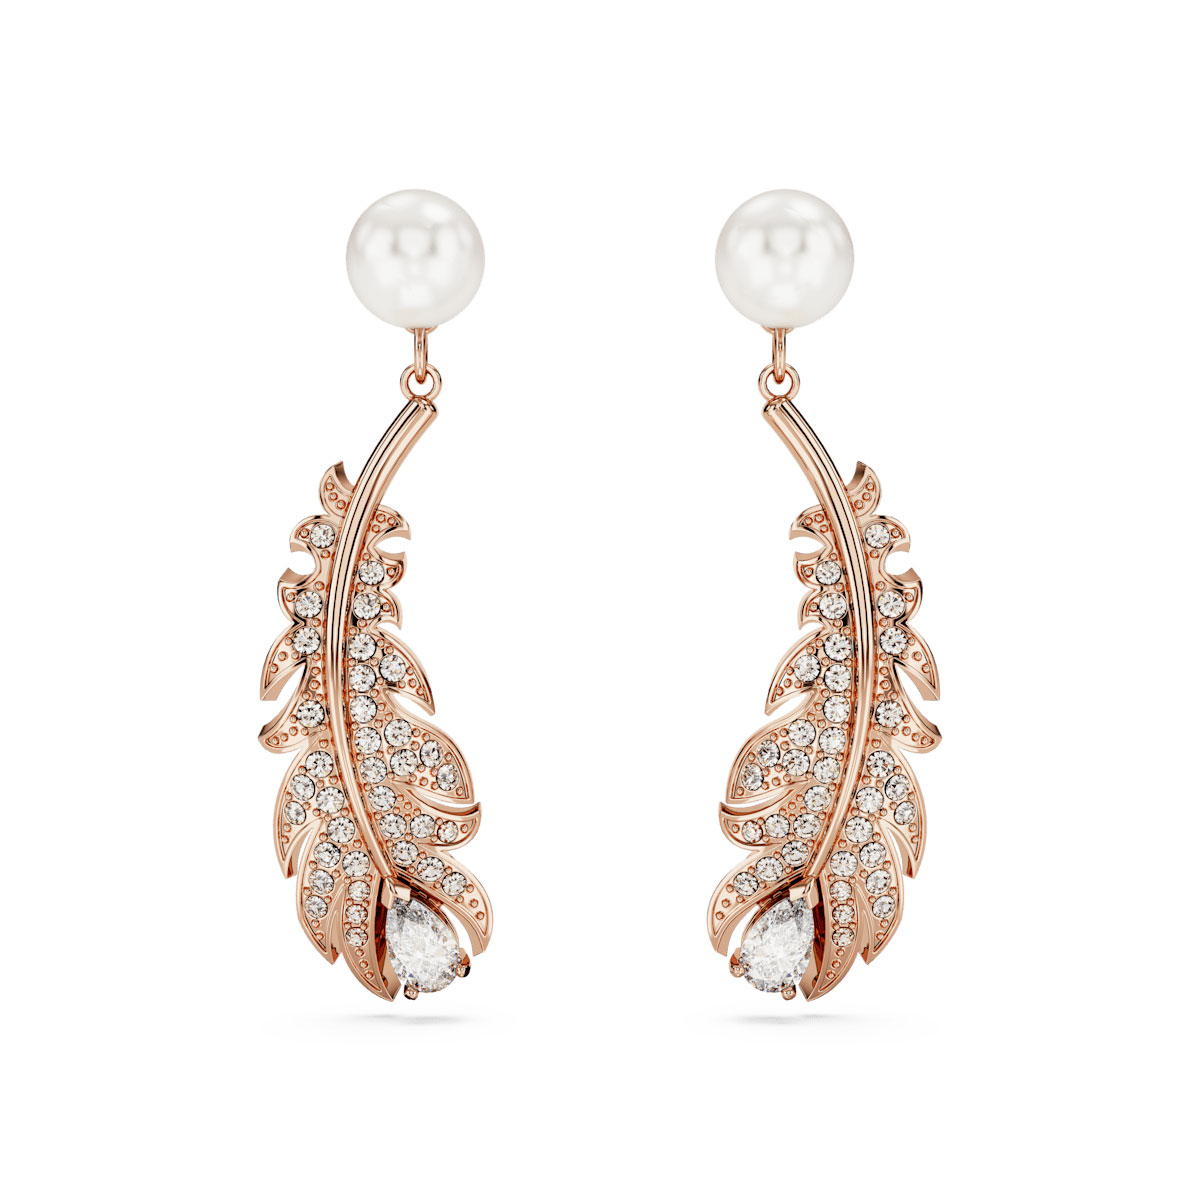 Swarovski Nice drop earrings, Mixed cuts, Feather, White, Rose gold